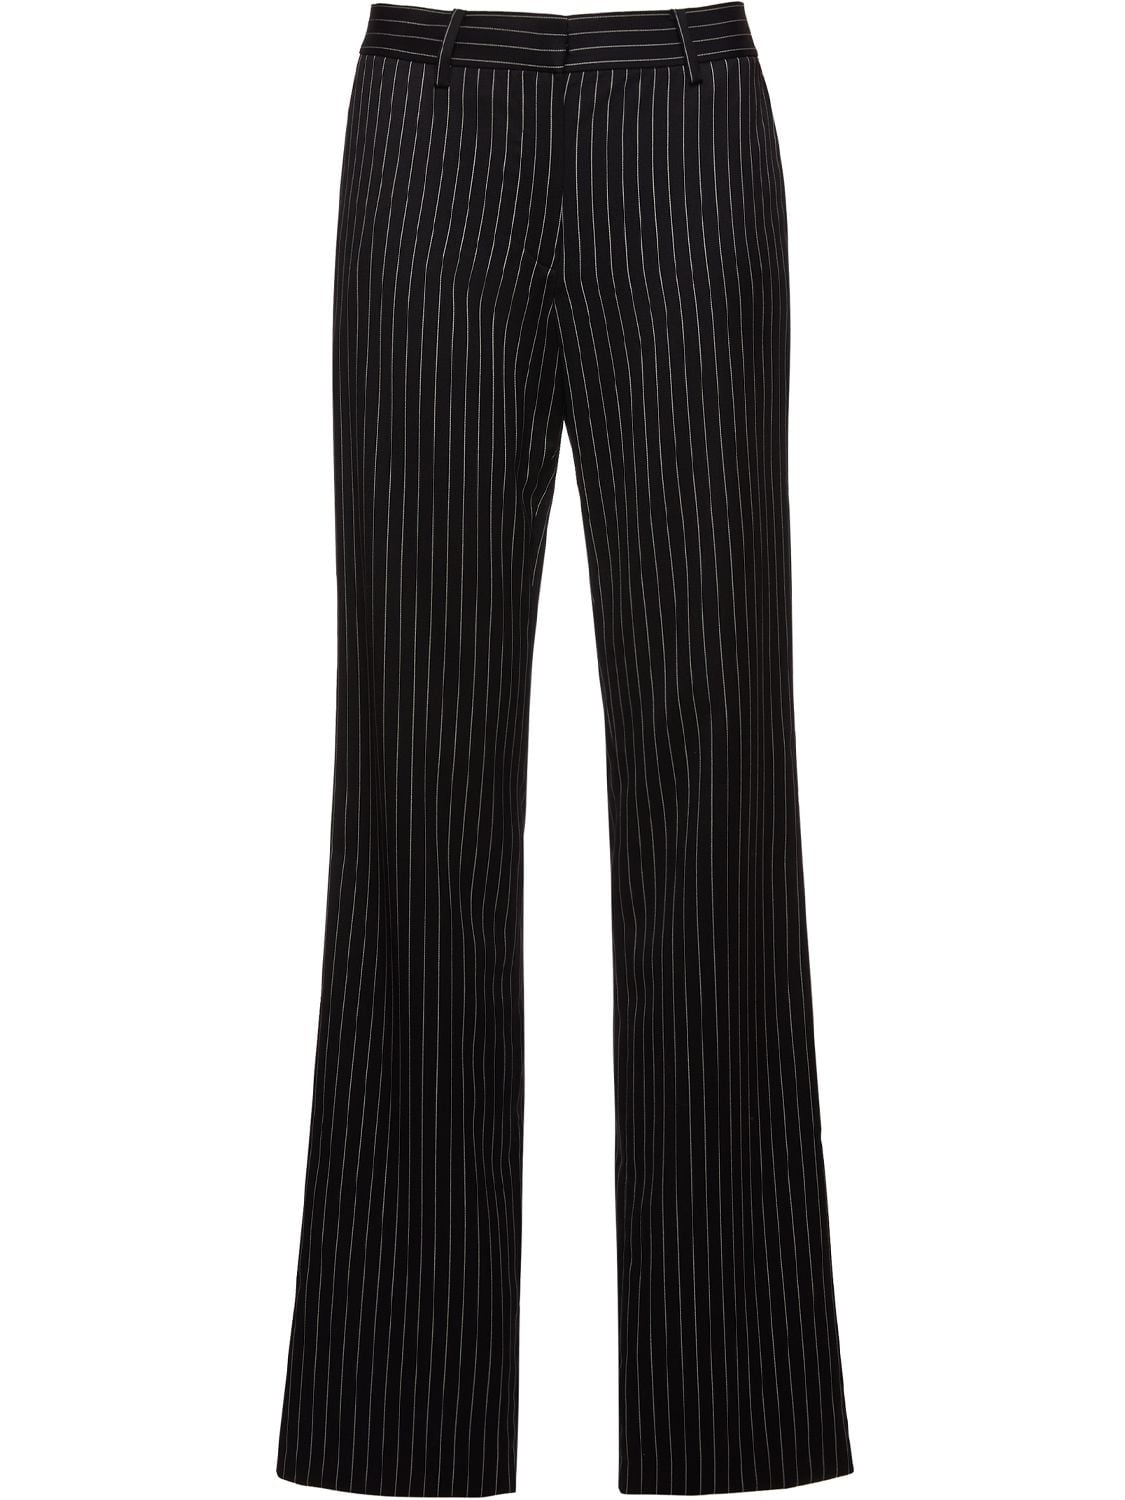 Image of Striped Twill Low Rise Pants